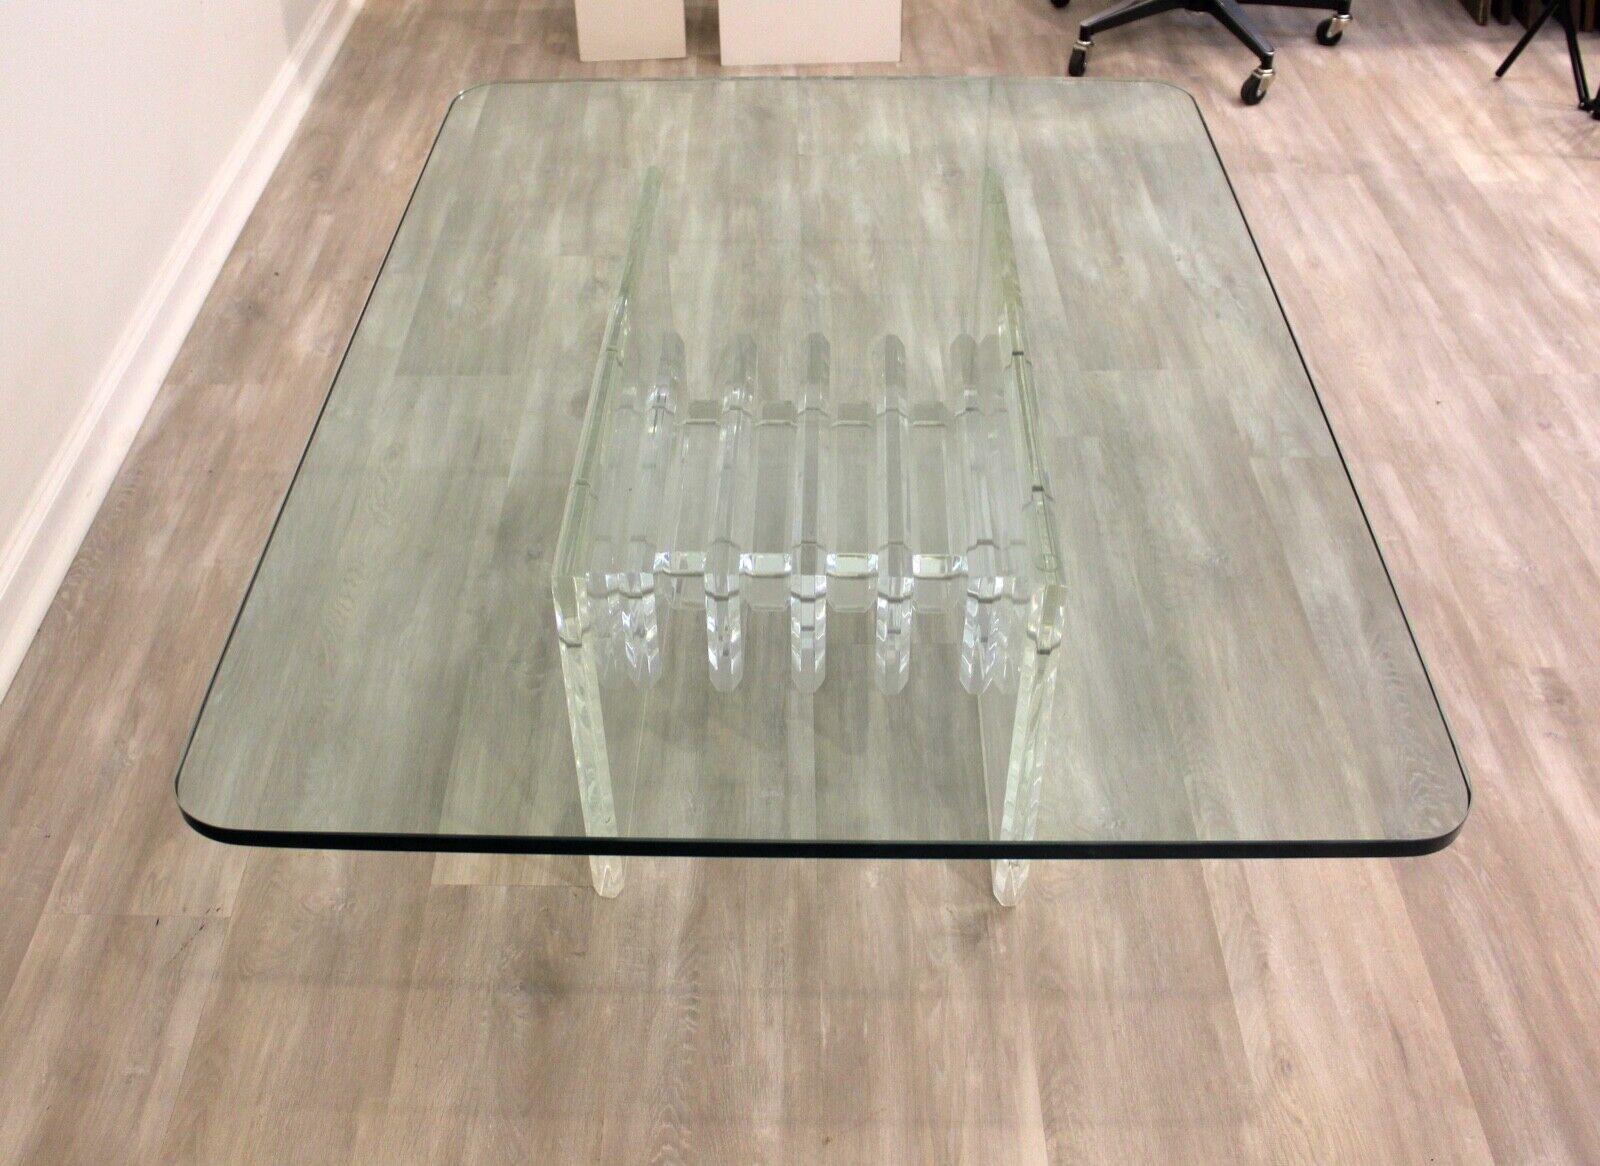 We presents this thick sculptural architectural lucite and glass rectangular coffee table. In very good condition. Dimensions: 48